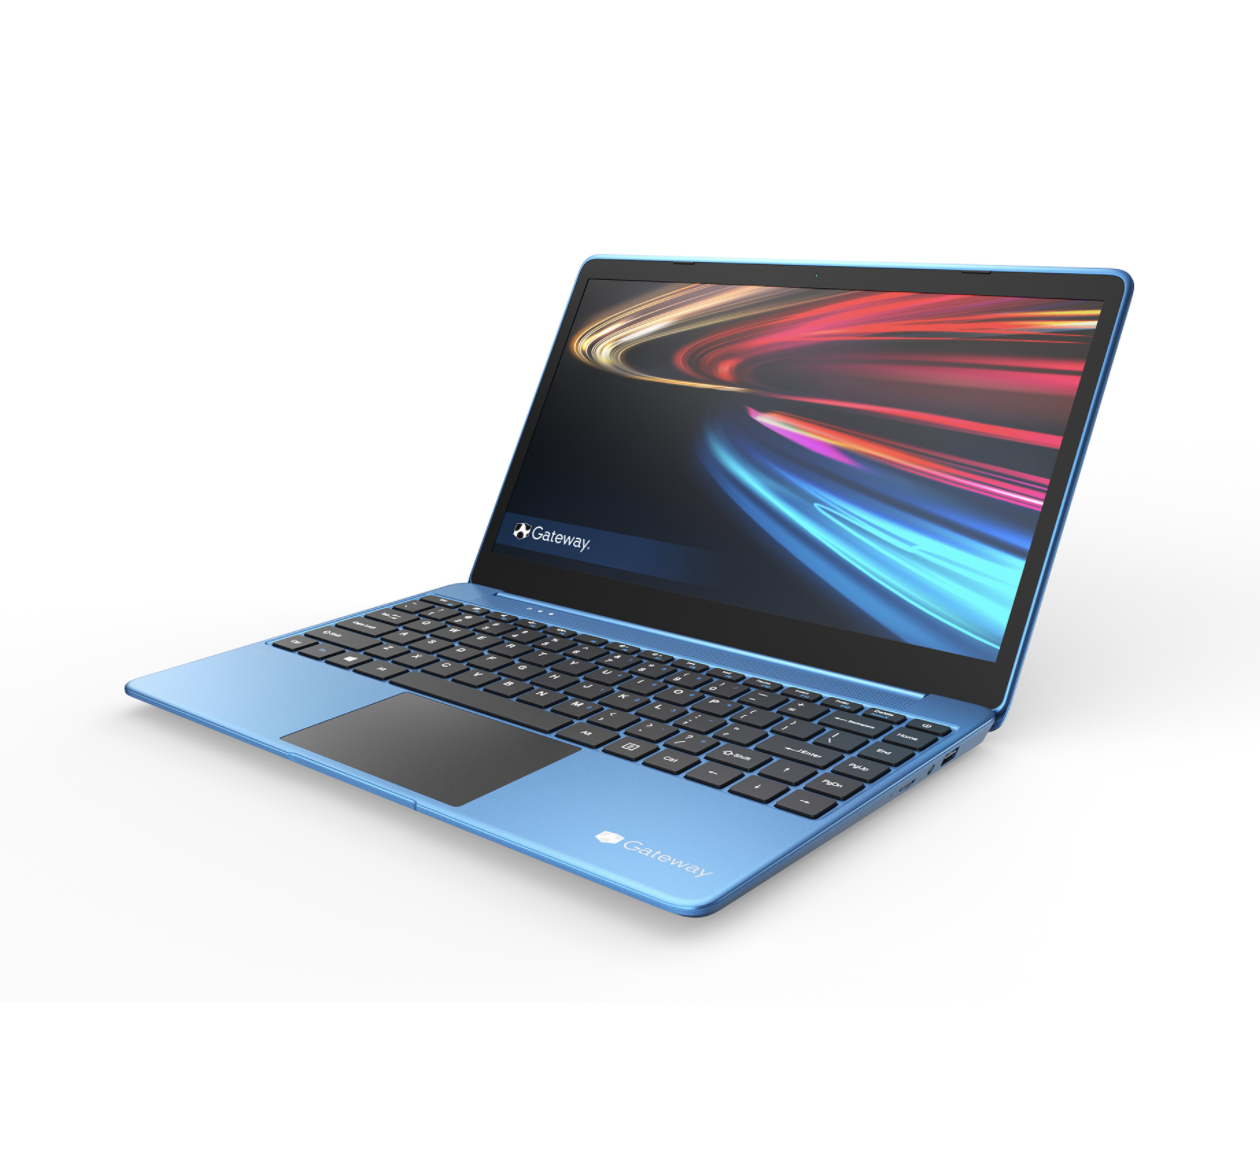 Gateway FHD Ultra Slim Notebook opened to reveal screen and keyboard